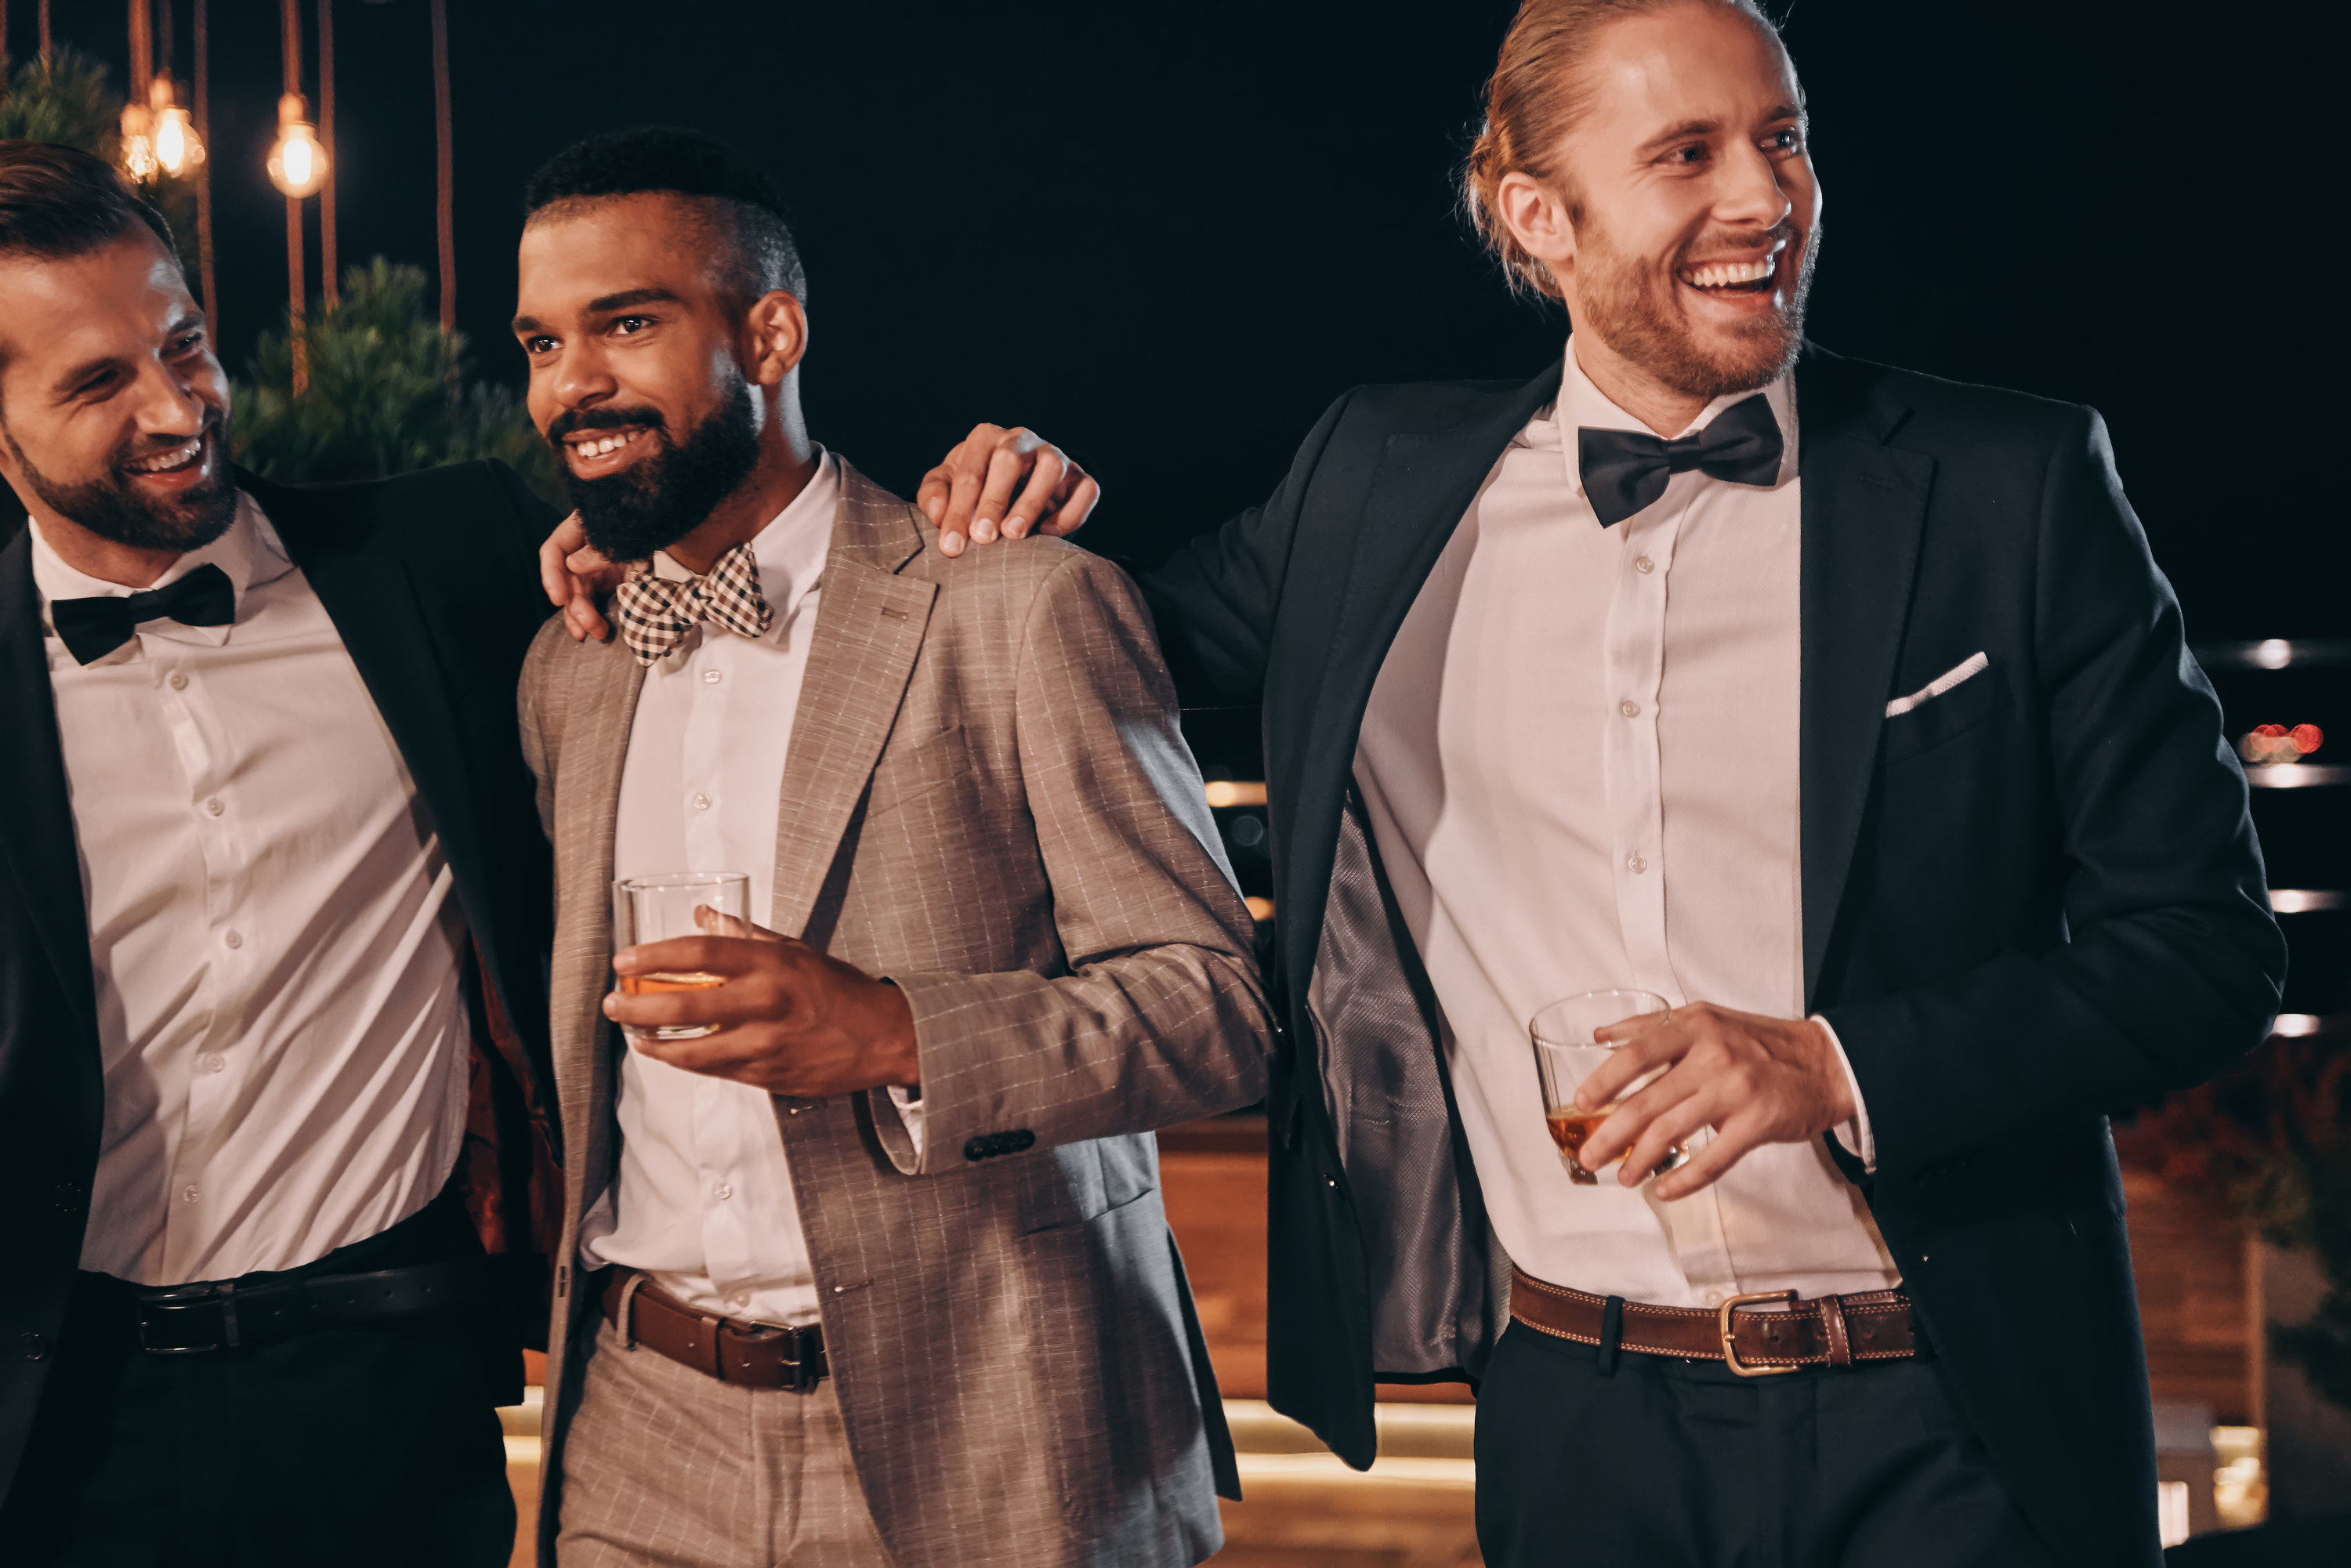 Three men in suits bonding and drinking whiskey